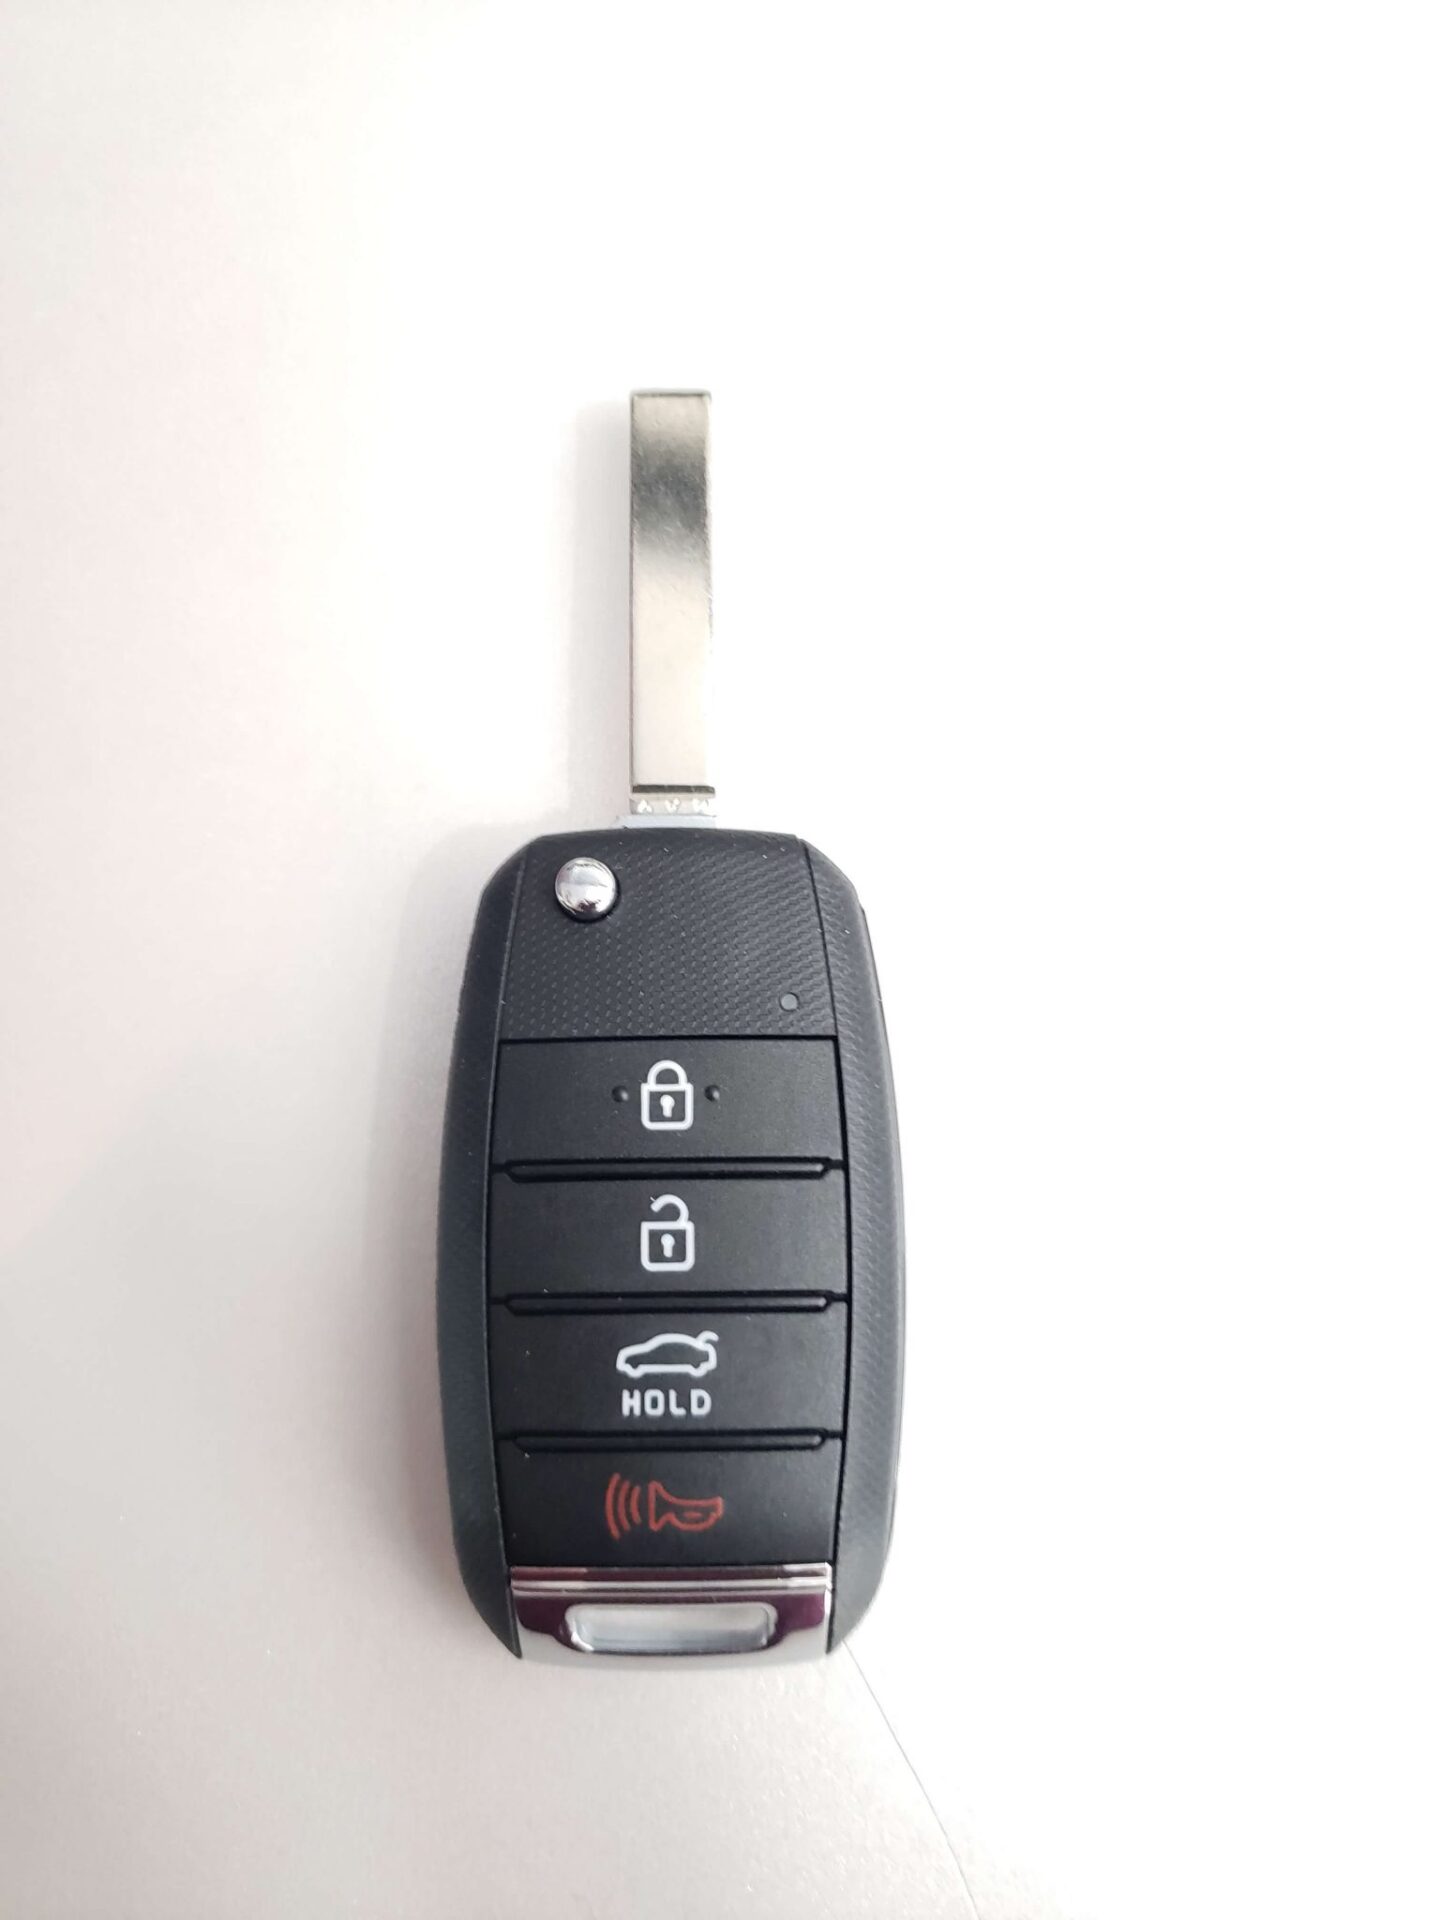 Kia Car Key Replacement - What To Do, Options, Tips, Costs & More